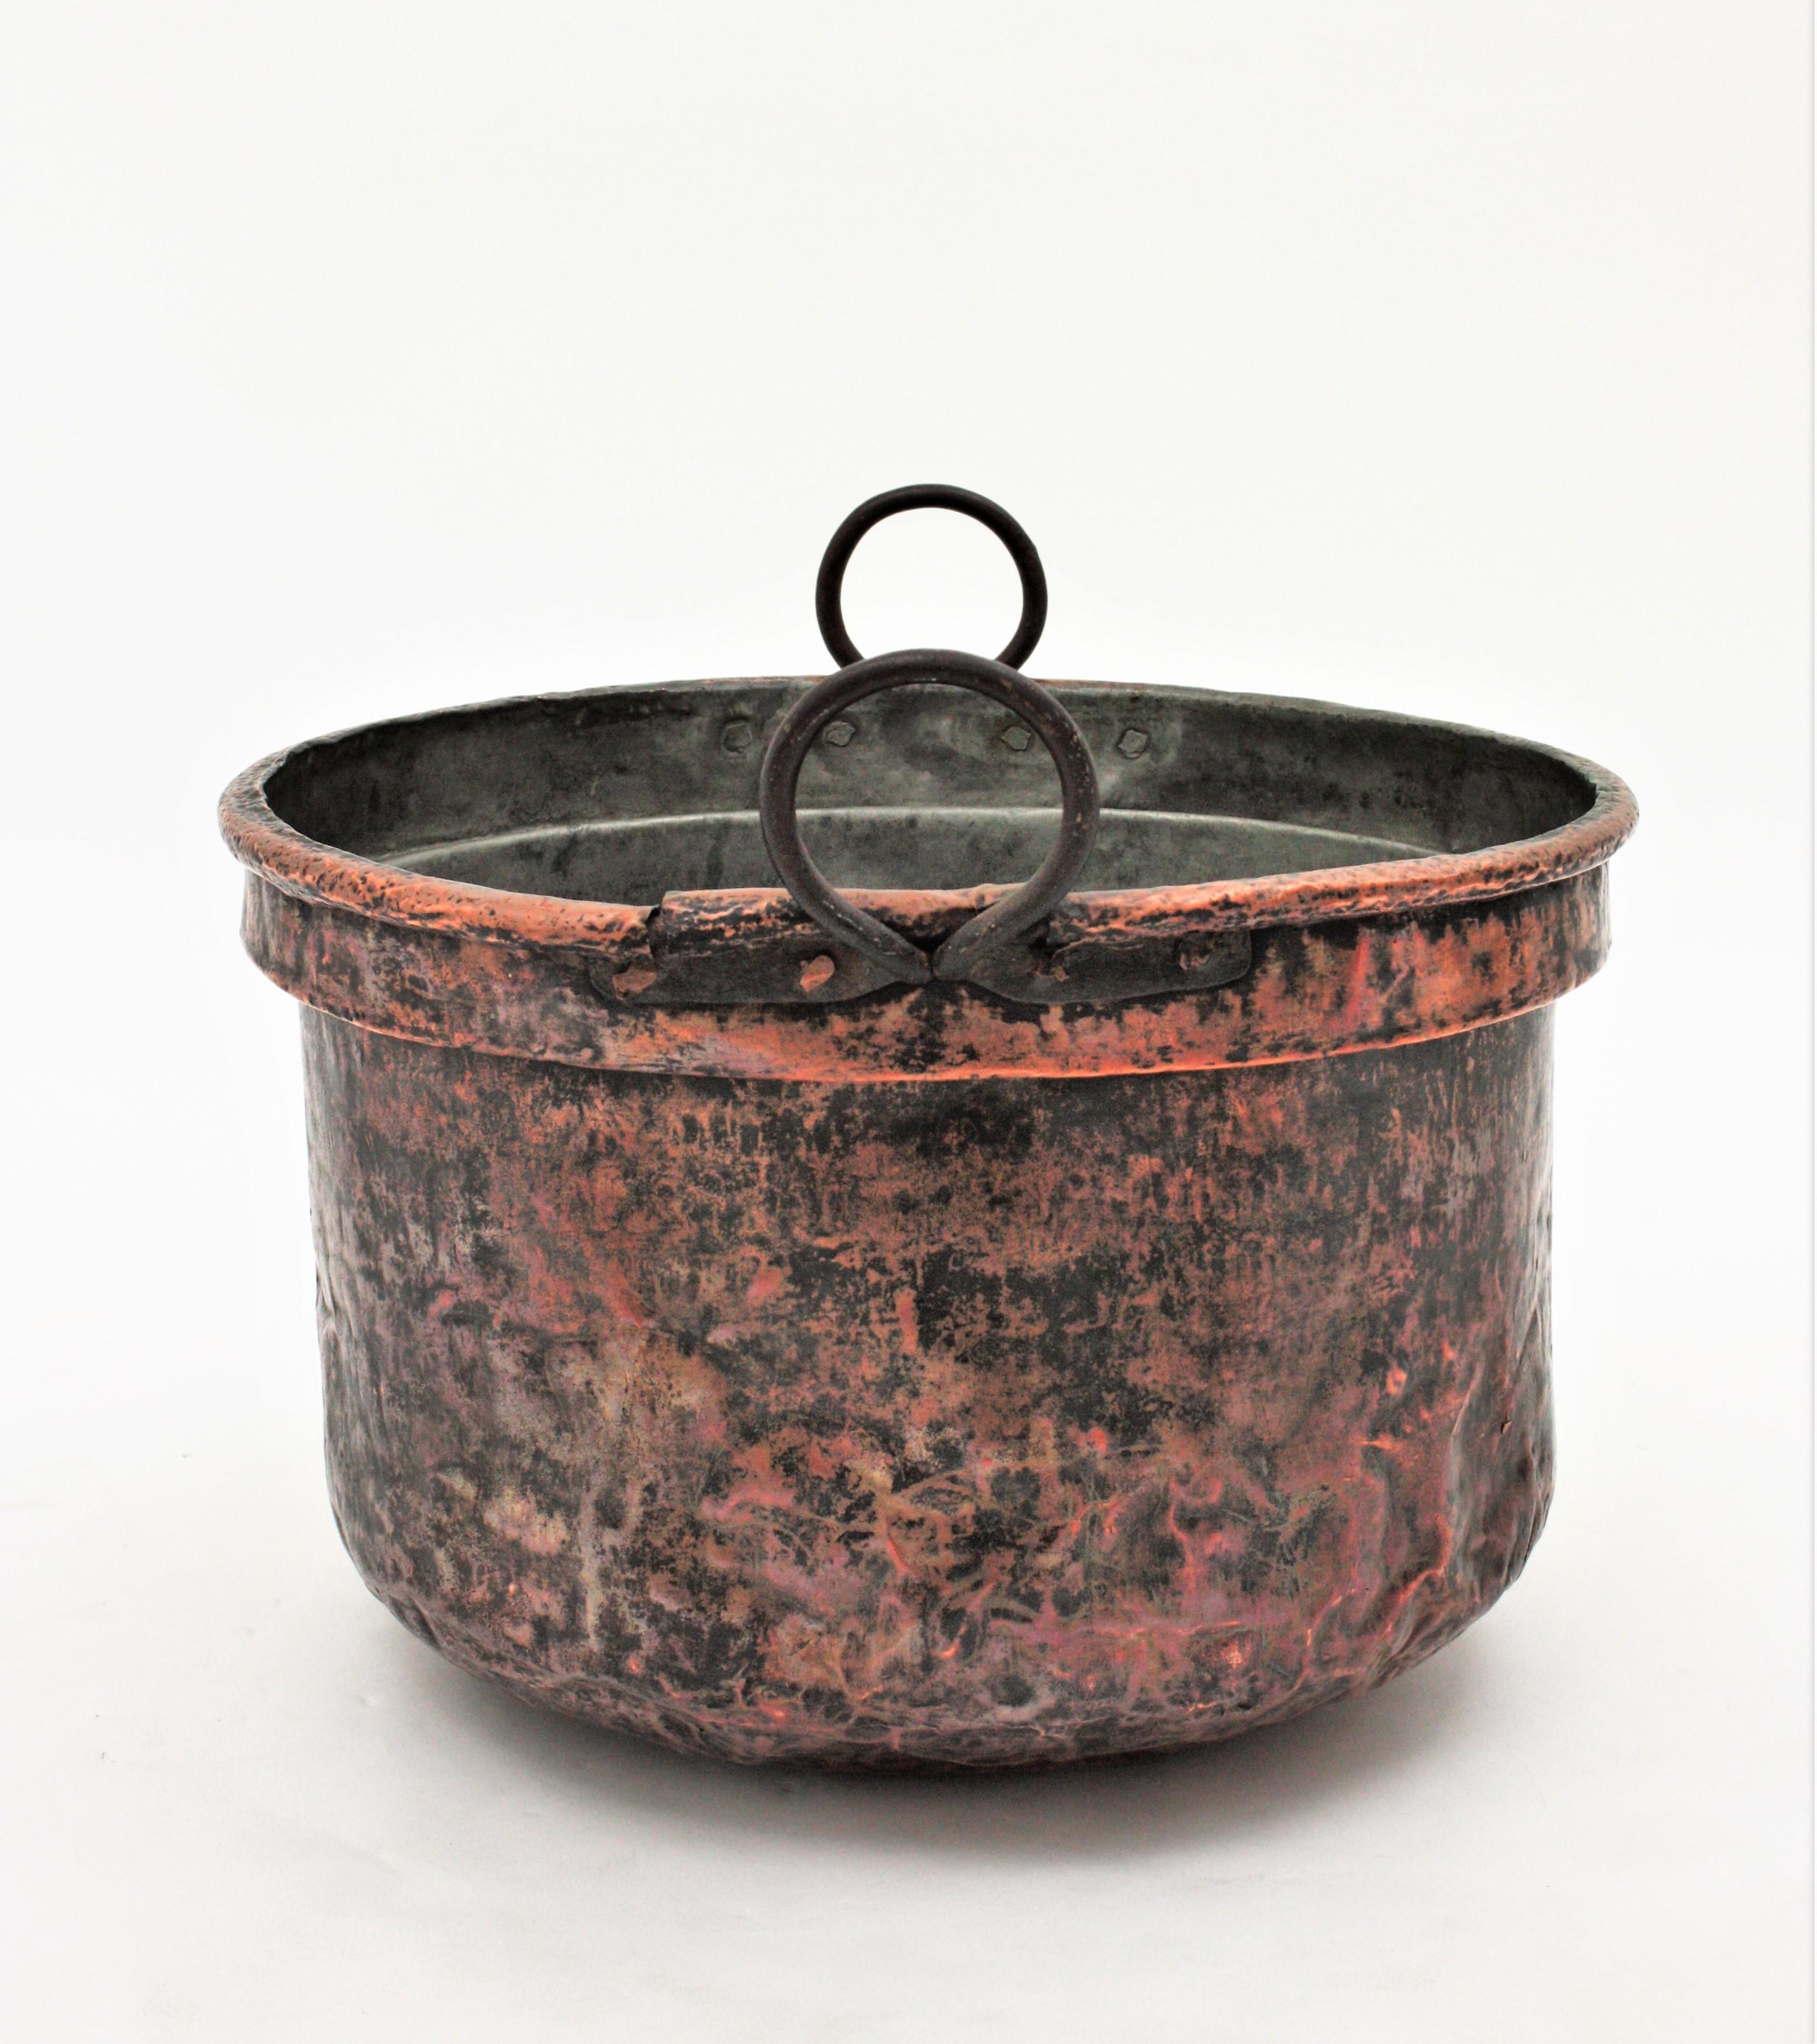 Oversized hand-hammered copper cauldron with iron handles, France, 1880s.
This handcrafted copper cauldron has a dramatic aged patina. The copper is heavily marked by the pass of time and it has a strong visual effect.
The iron handles are